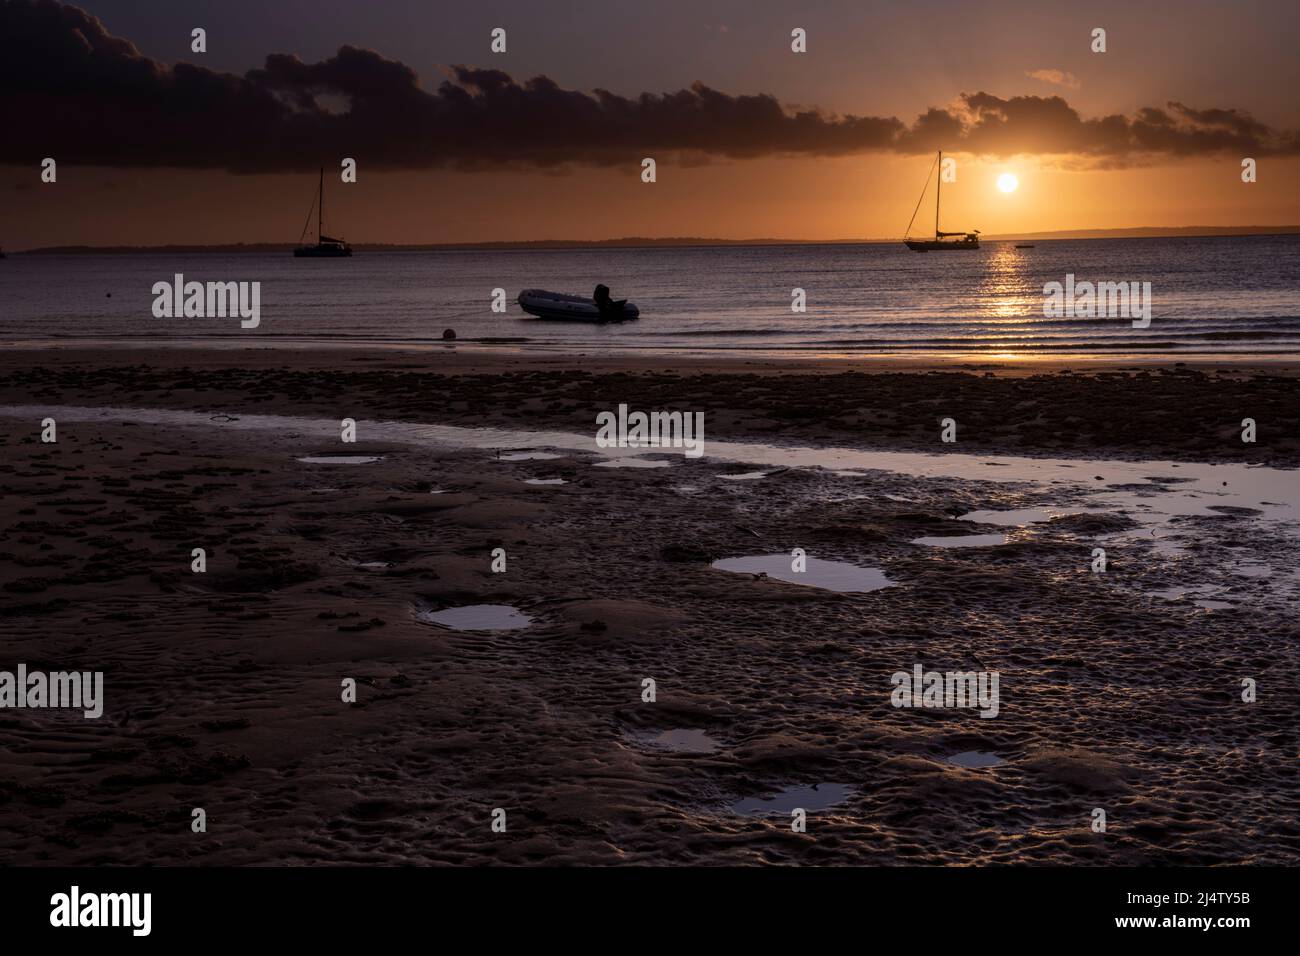 Boats at sunset at Kingfisher Bay, Fraser Island. Queensland, Australia. Stock Photo